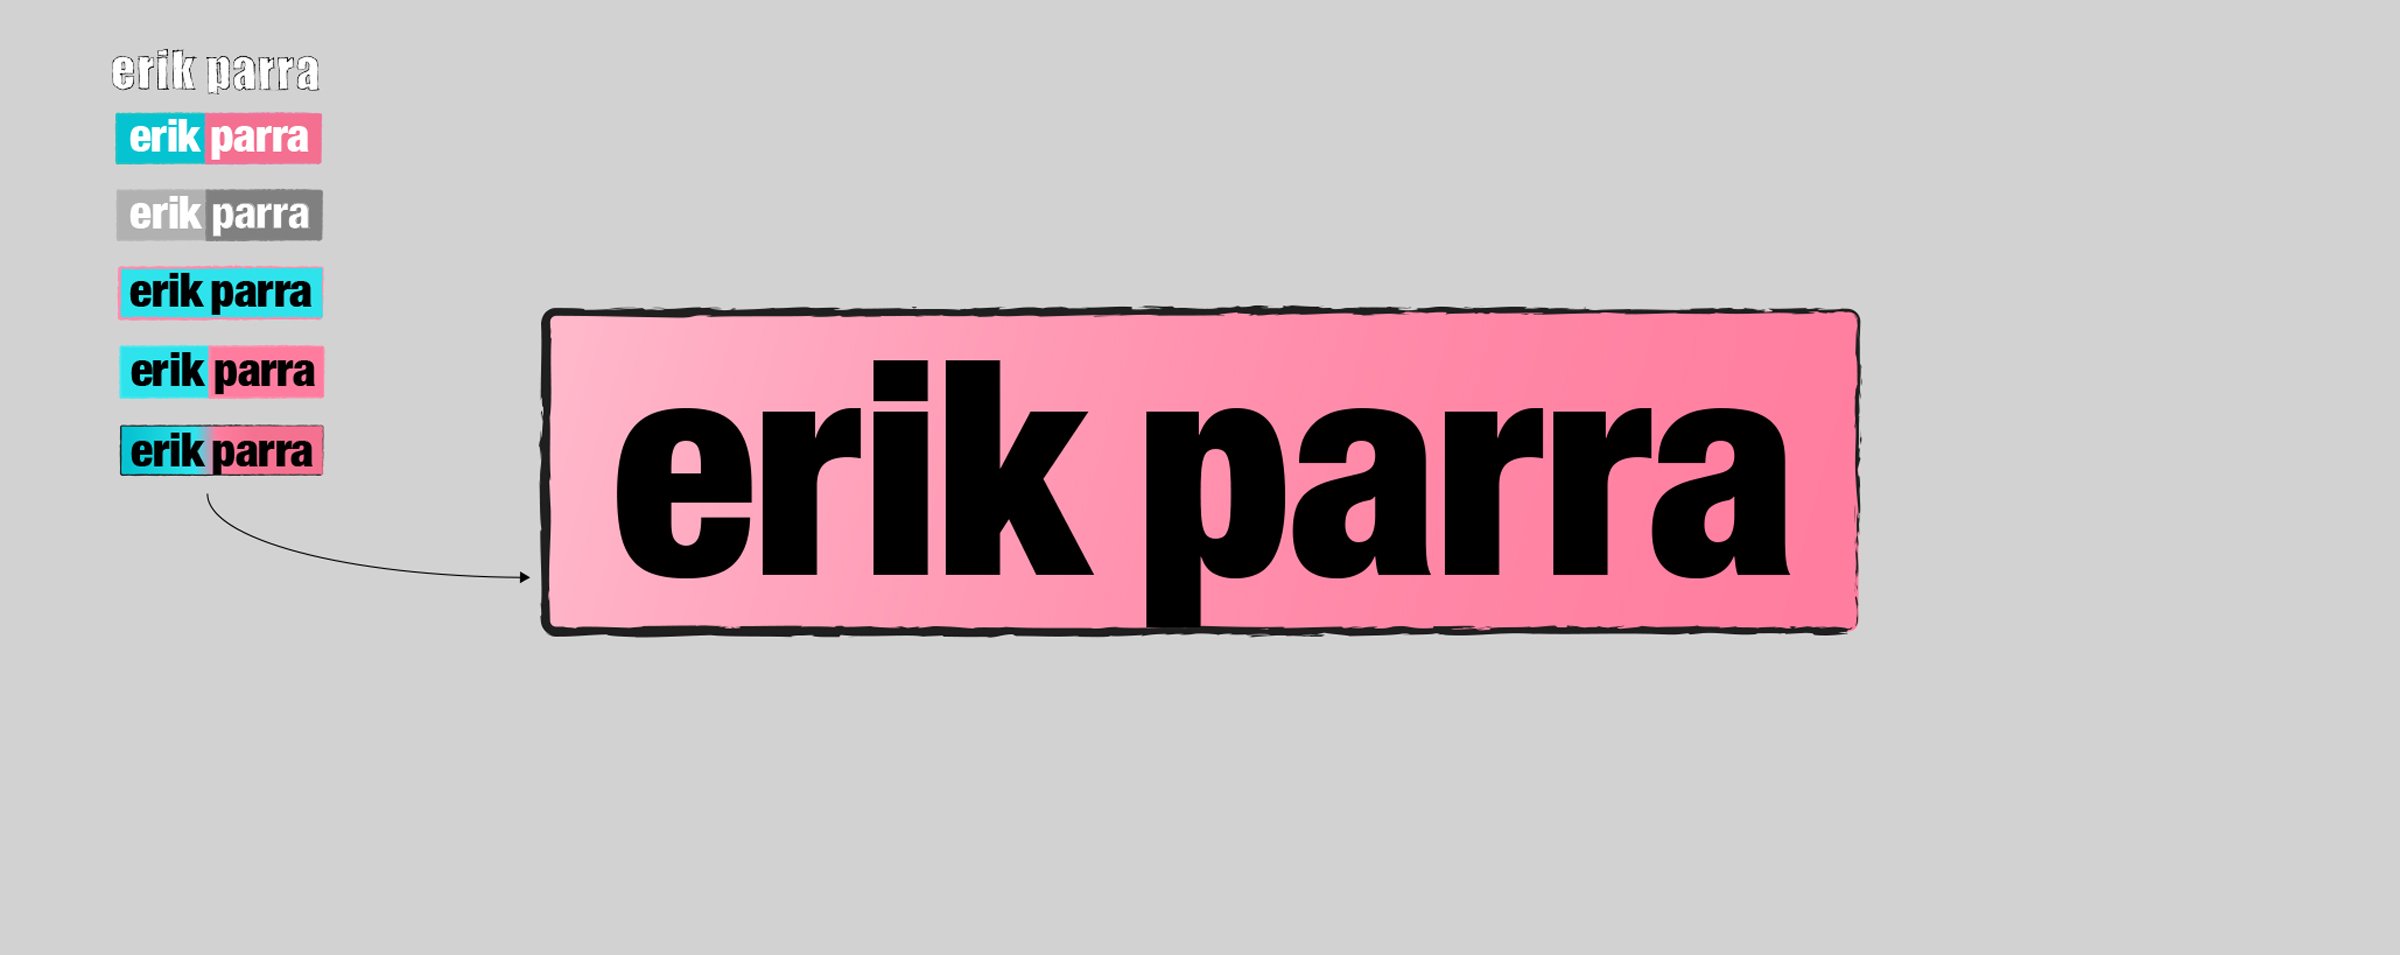  A new artist's mark reflects Erik's vision, passion, humor and propensity for Helvetica and pink. 